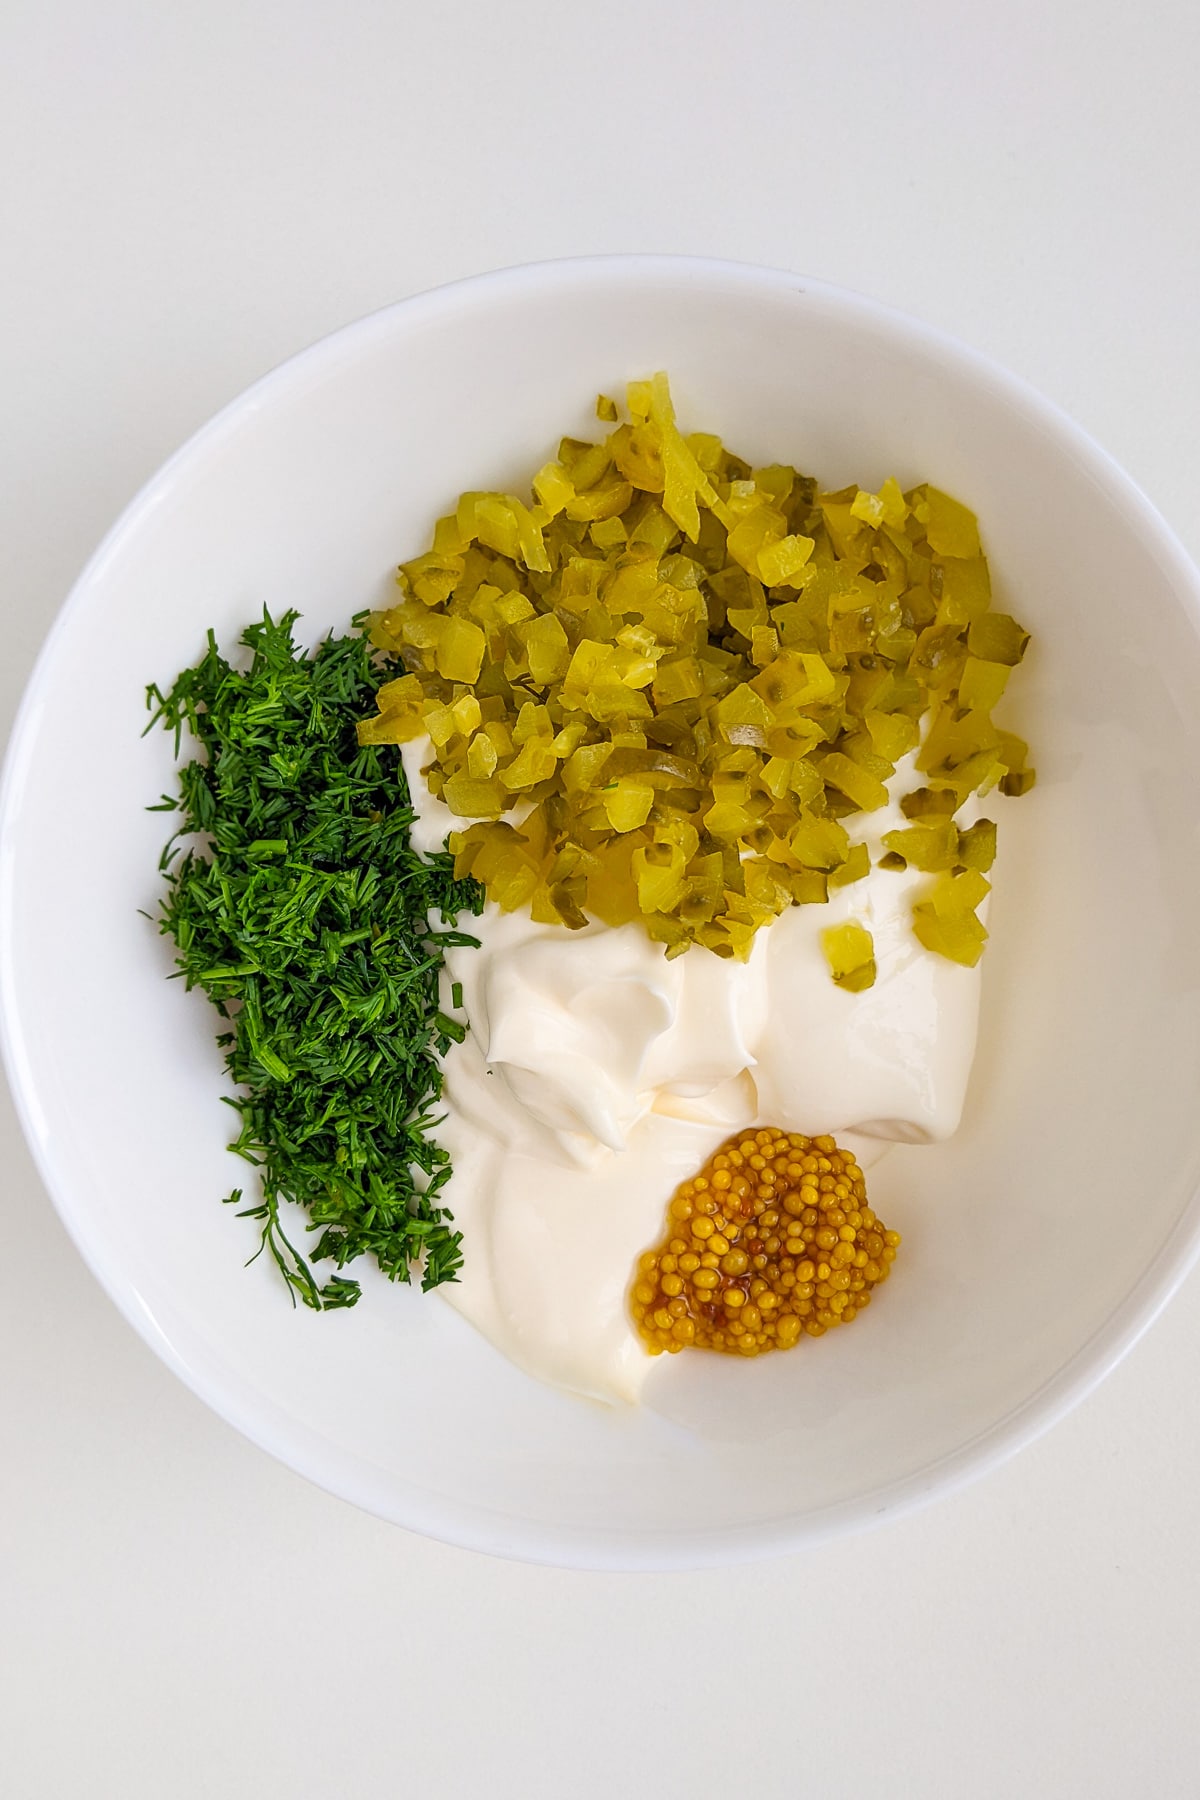 Chopped dill, whole mustard, mayo and pickles in a white plate.